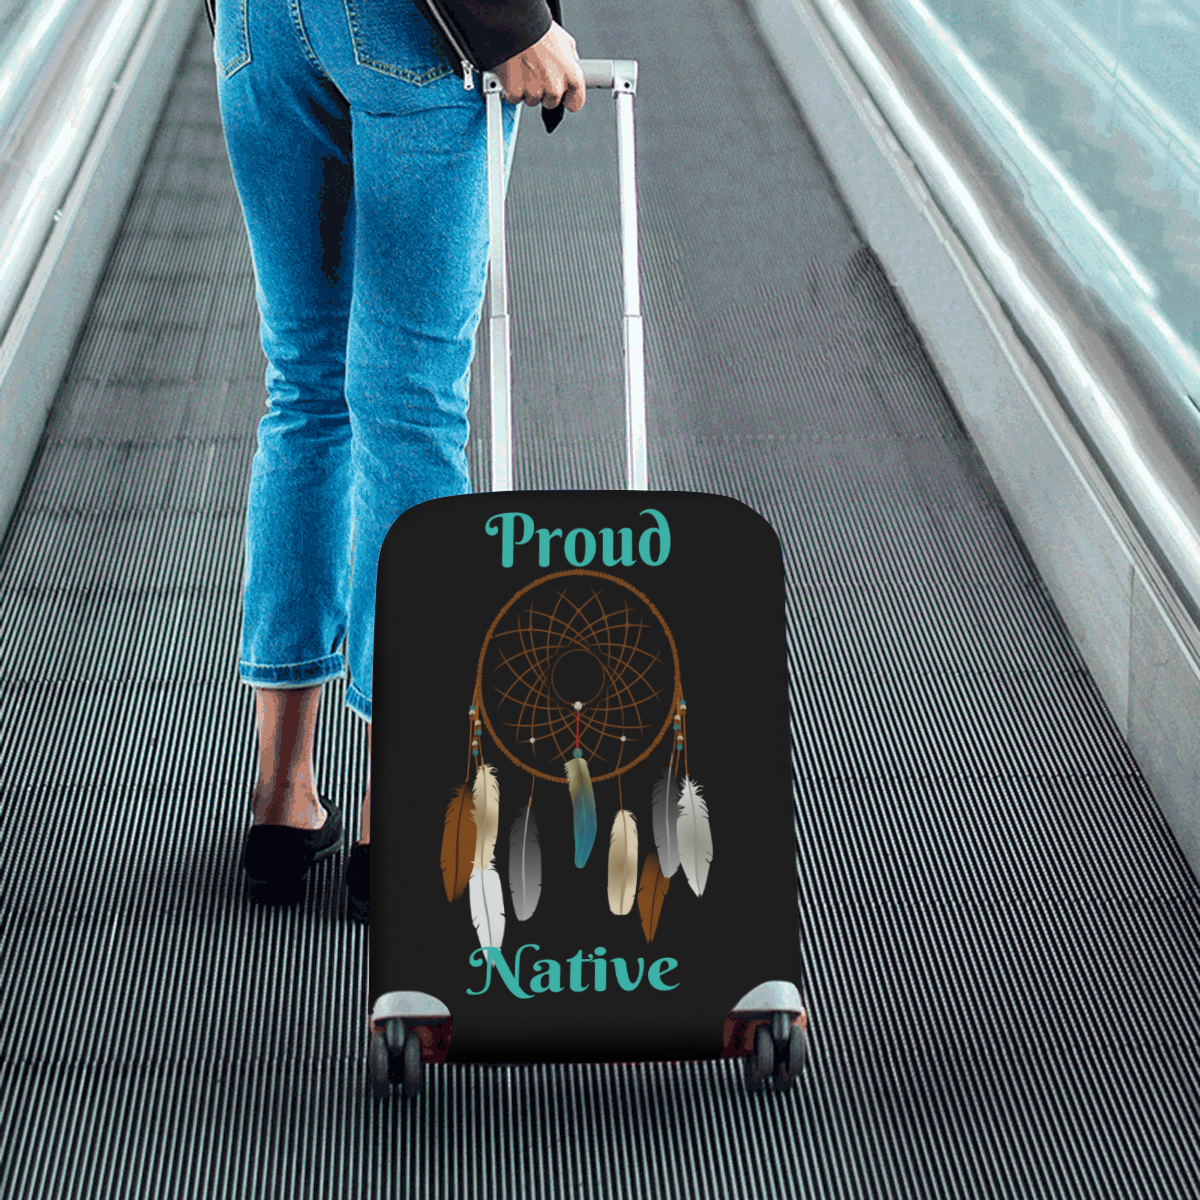 Proud Native Luggage Cover Luggage Cover/Small 18"-21"